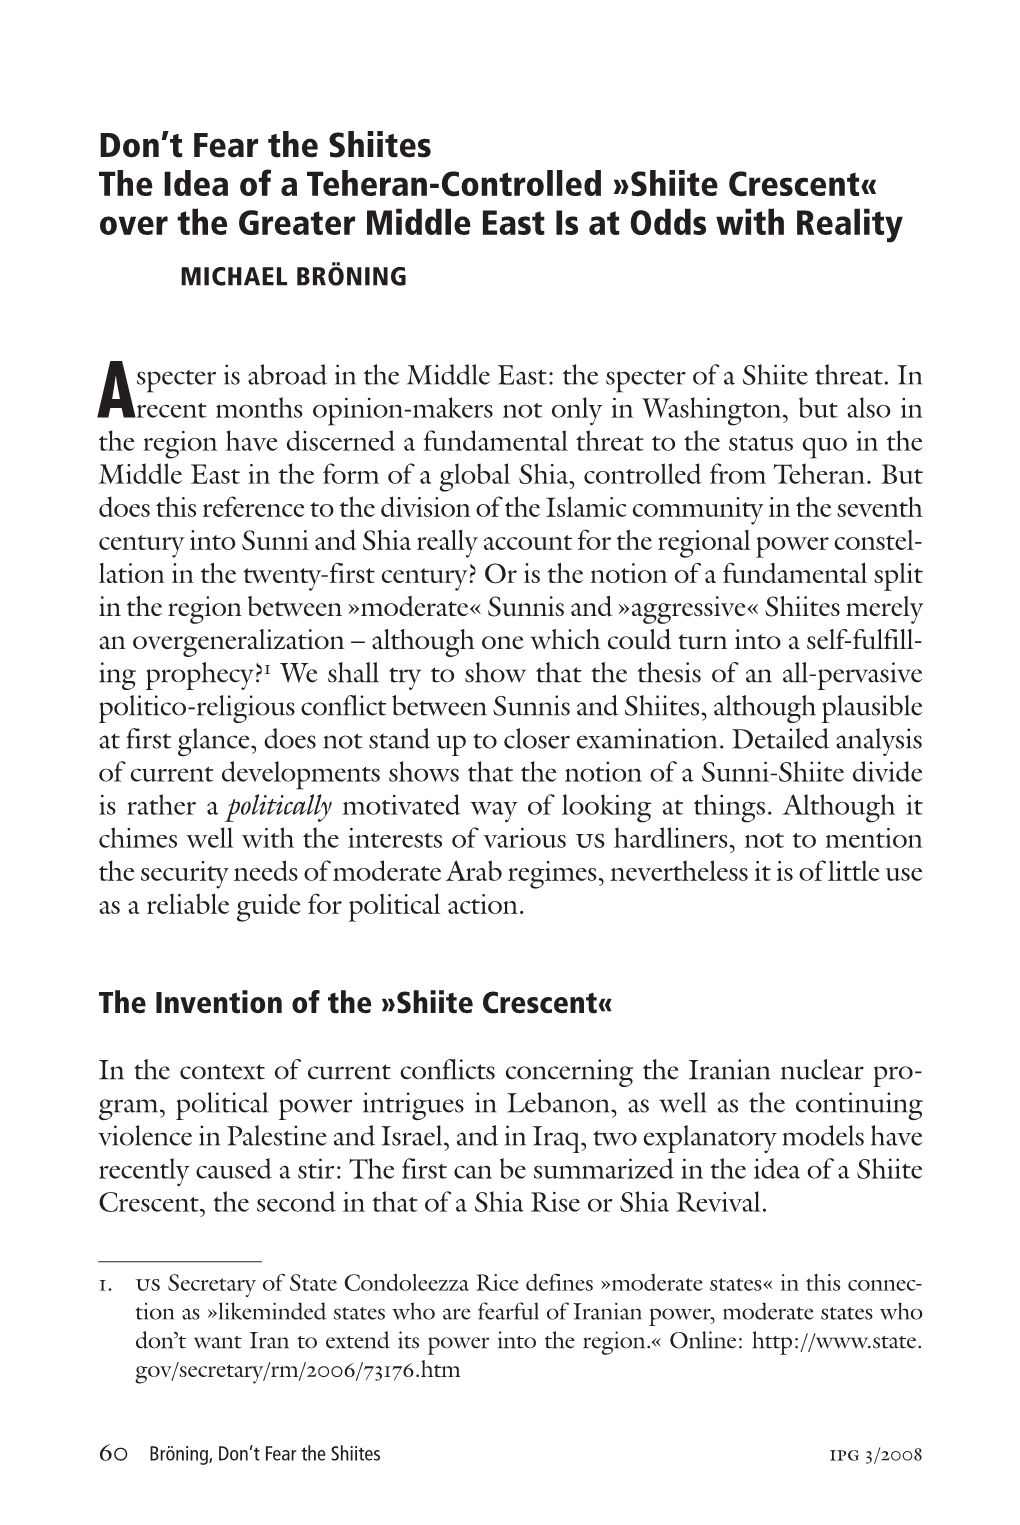 Shiite Crescent« Over the Greater Middle East Is at Odds with Reality MICHAEL BRÖNING